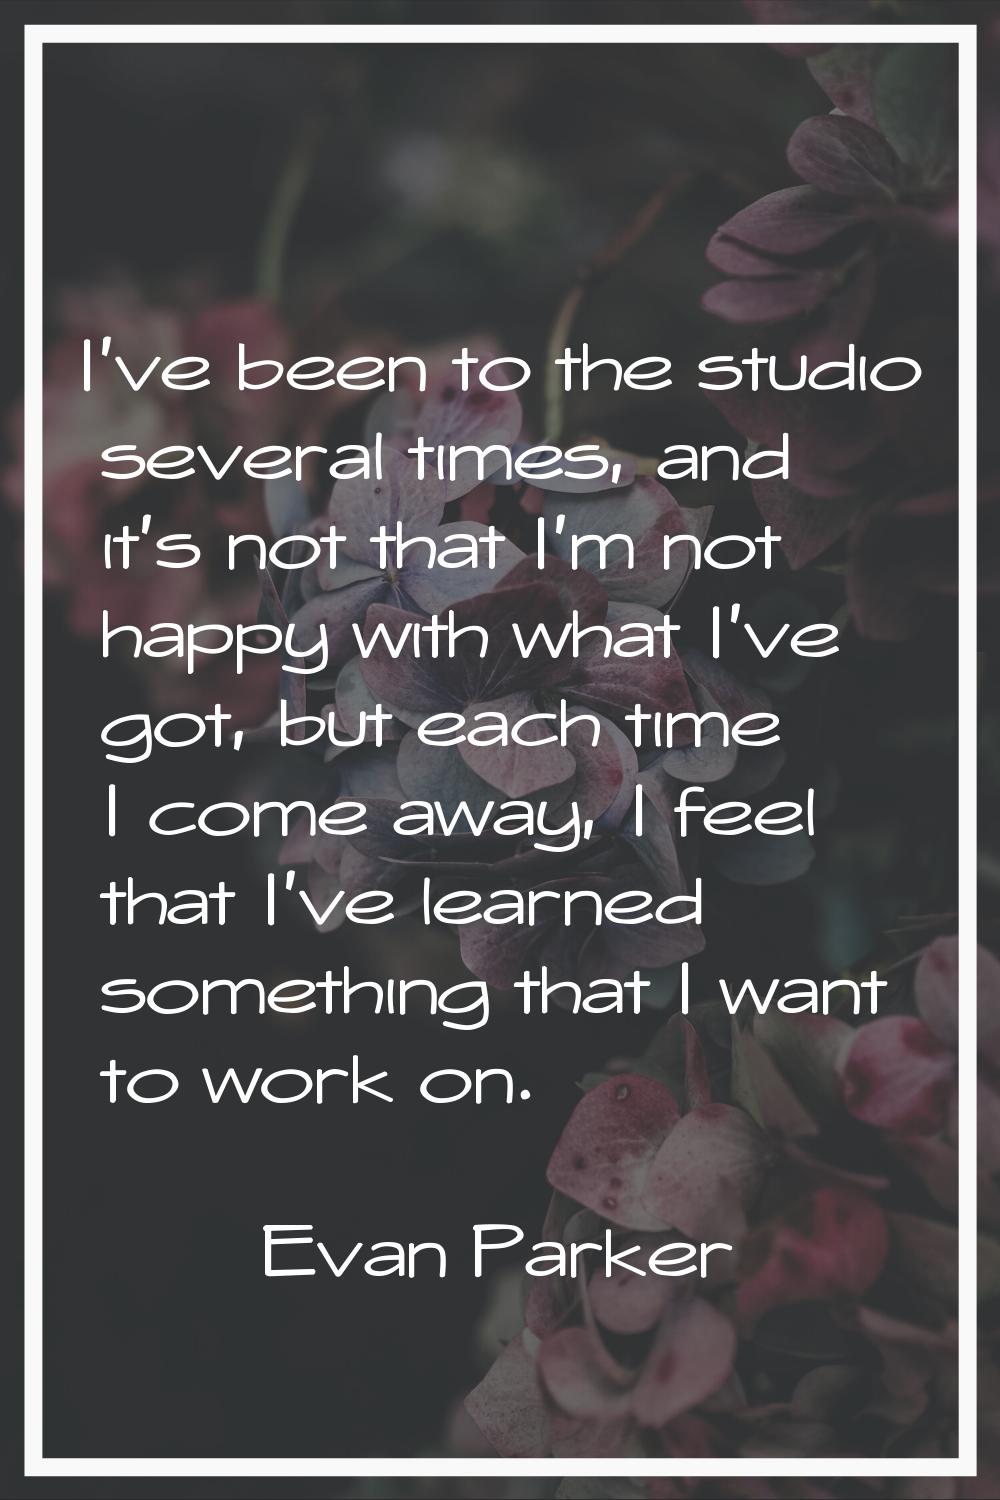 I've been to the studio several times, and it's not that I'm not happy with what I've got, but each